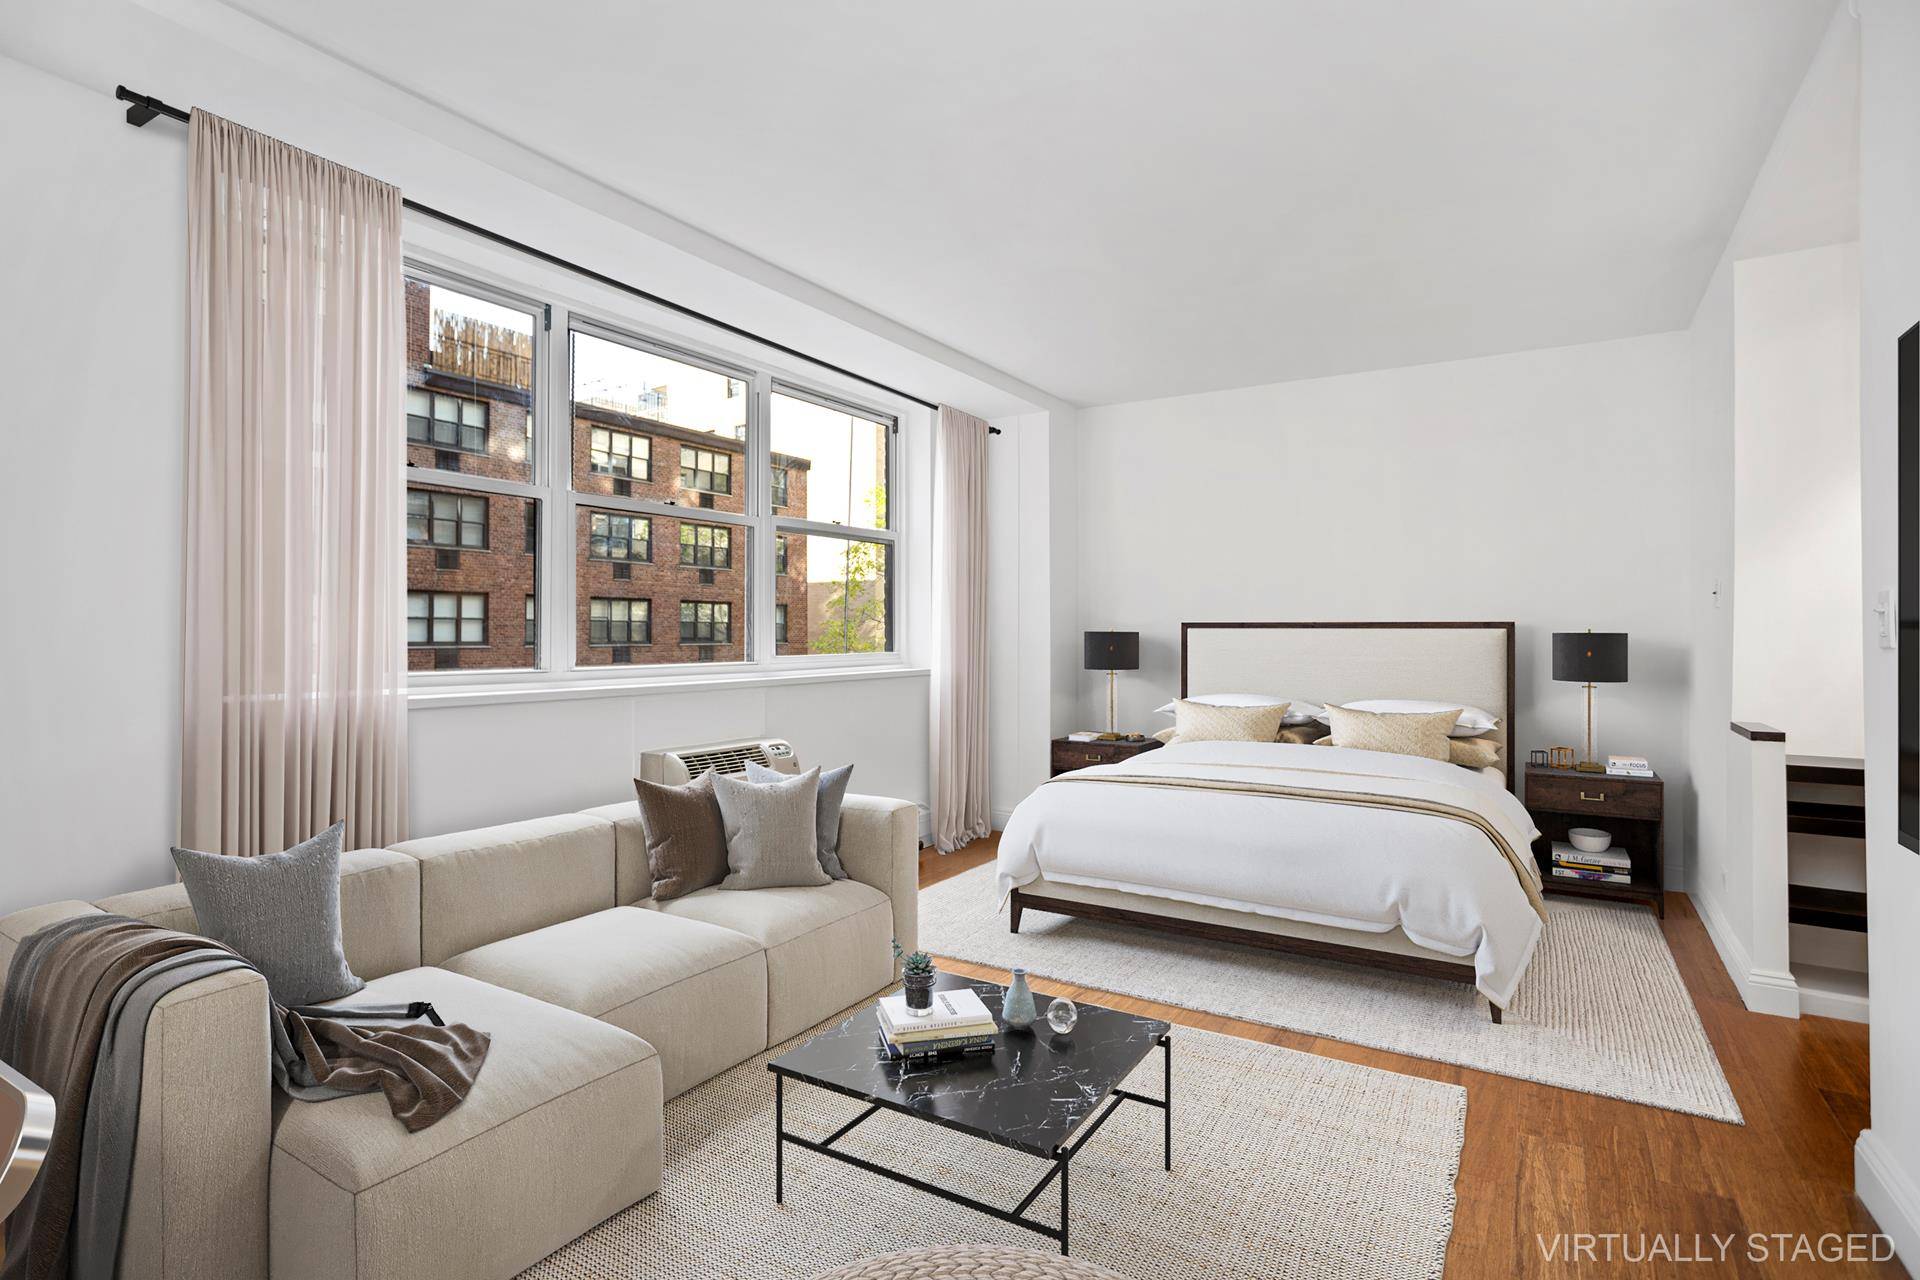 Residence 5E is a large studio apartment with sunny southern exposures and is perfectly situated in the heart of Greenwich Village.